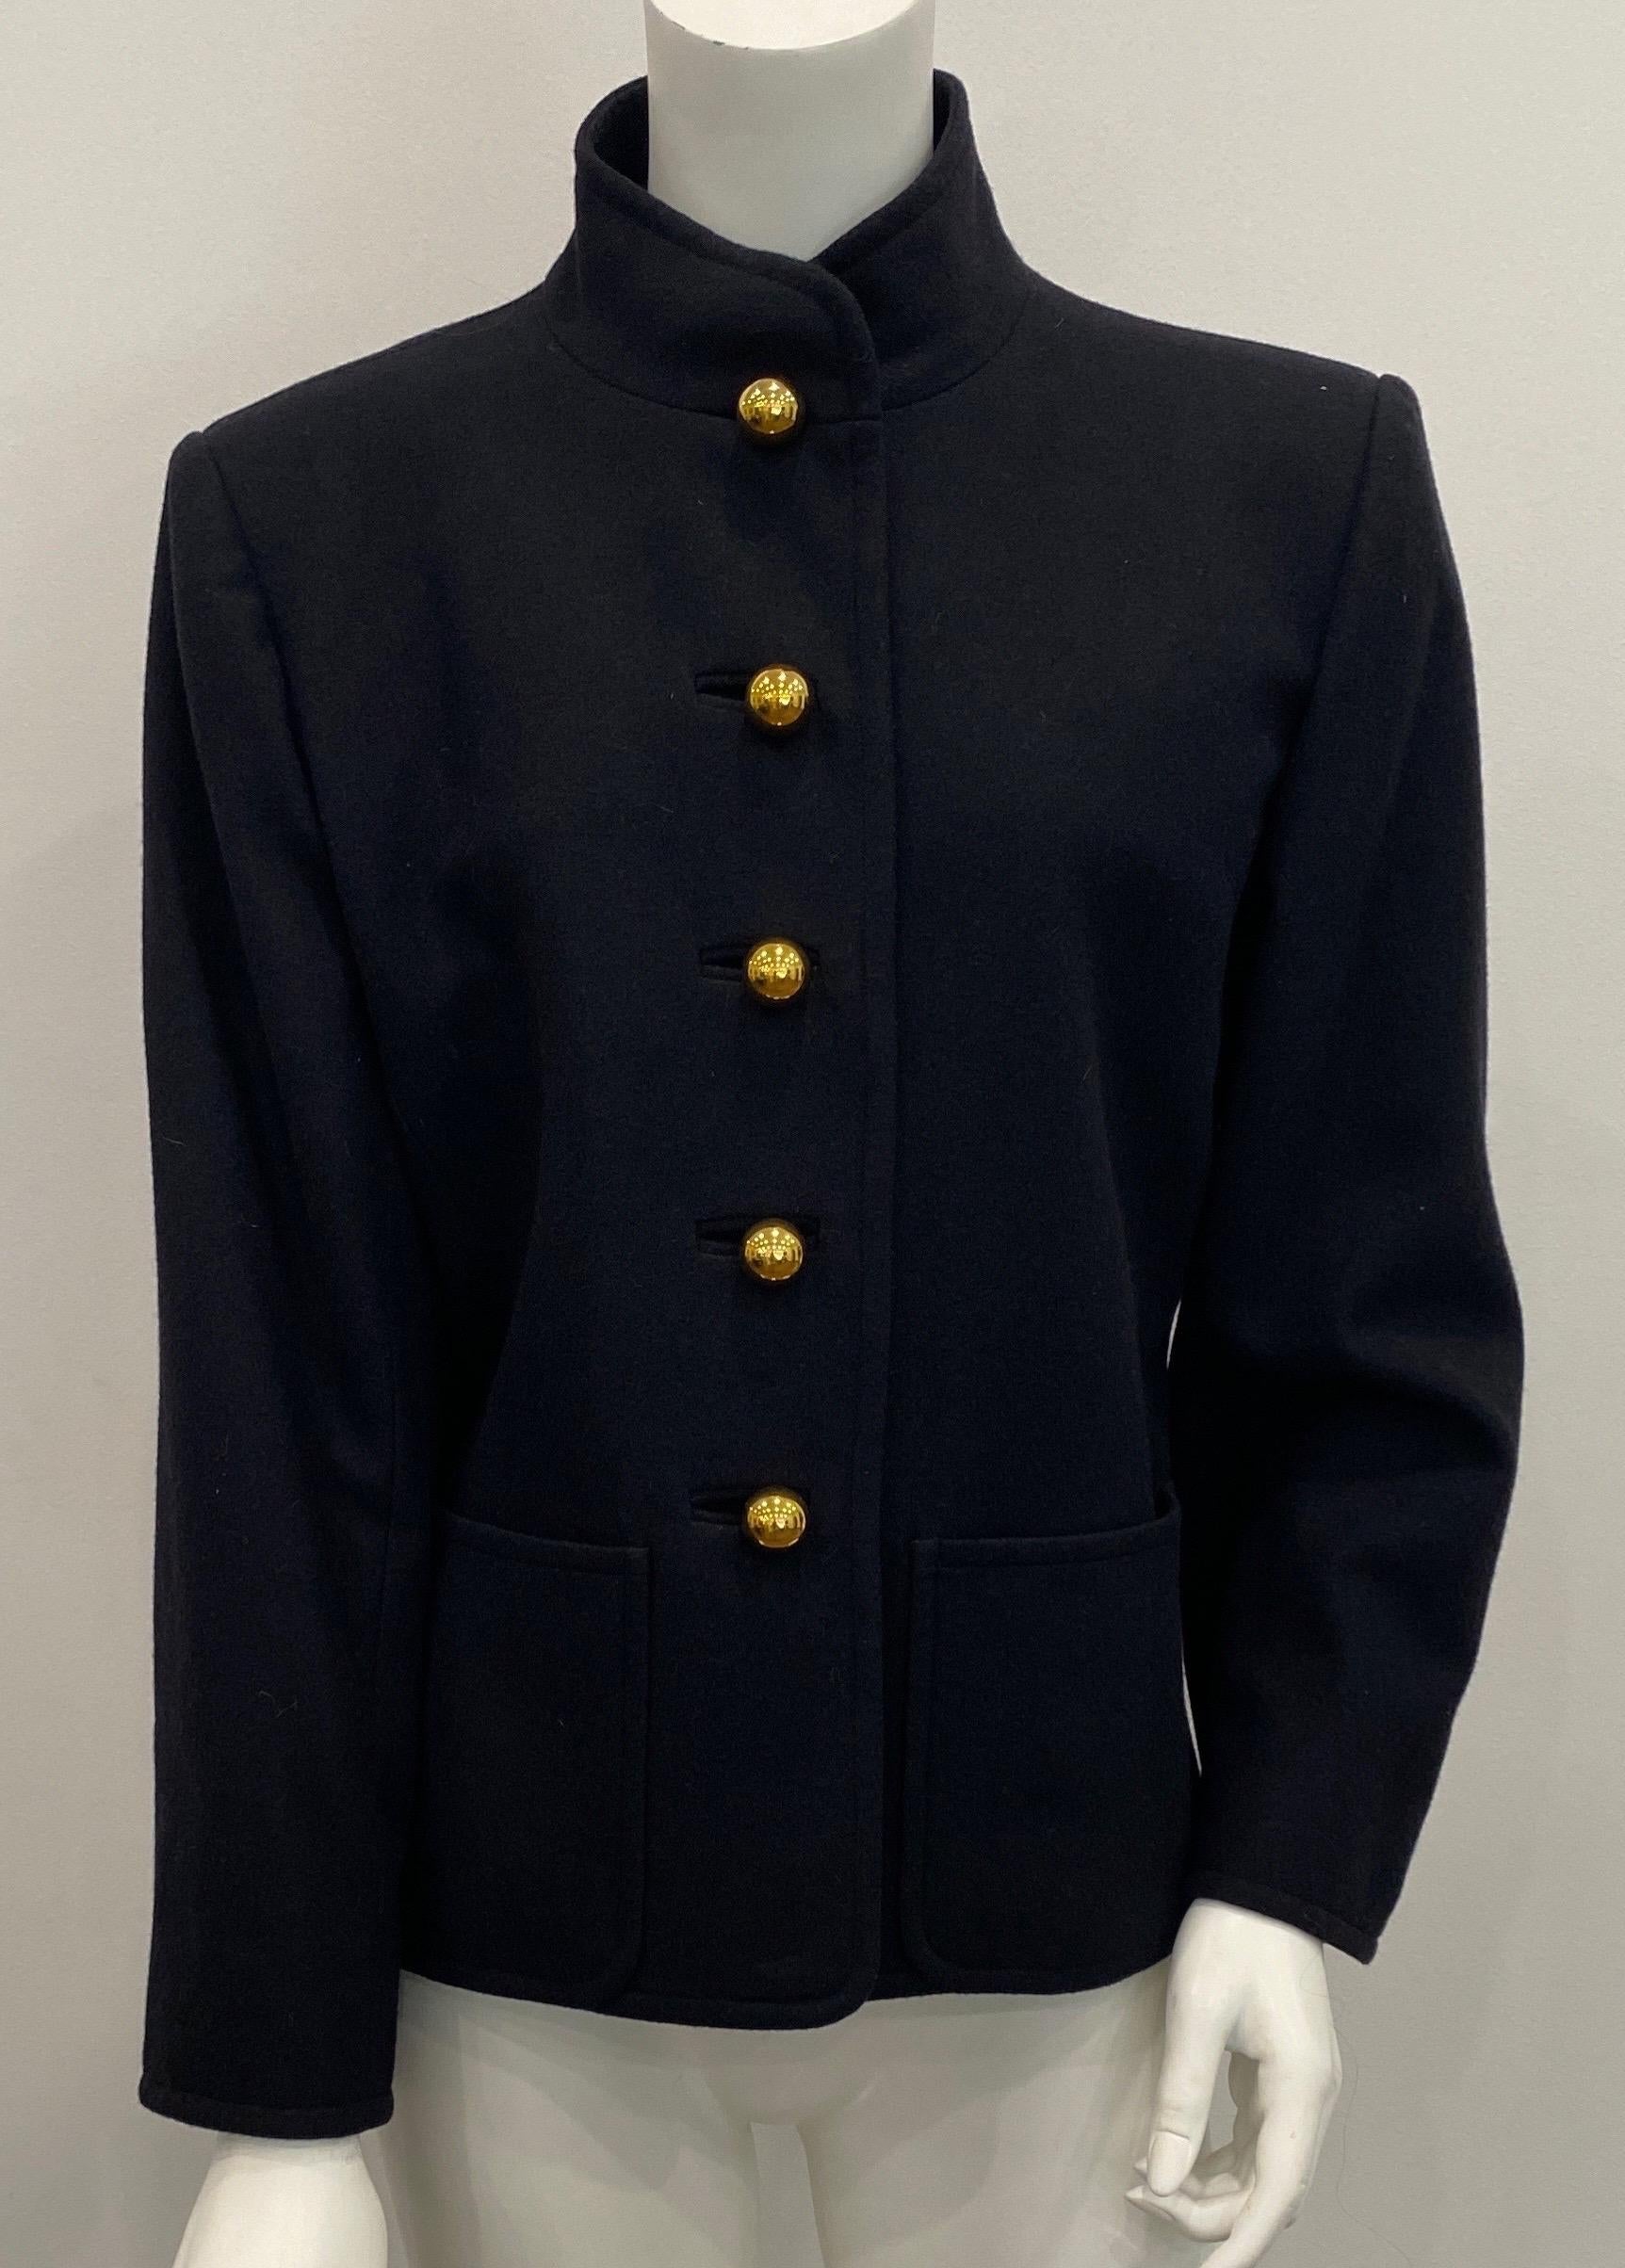 Yves Saint Laurent Rive Gauche 1970's Black Soft Double-Faced Wool Jacket. Size 44 This spectacular vintage piece is Single Breasted with 5 large gold ball buttons, has 2 front patch pockets and is fully lined. The Sleeves have 3 gold ball